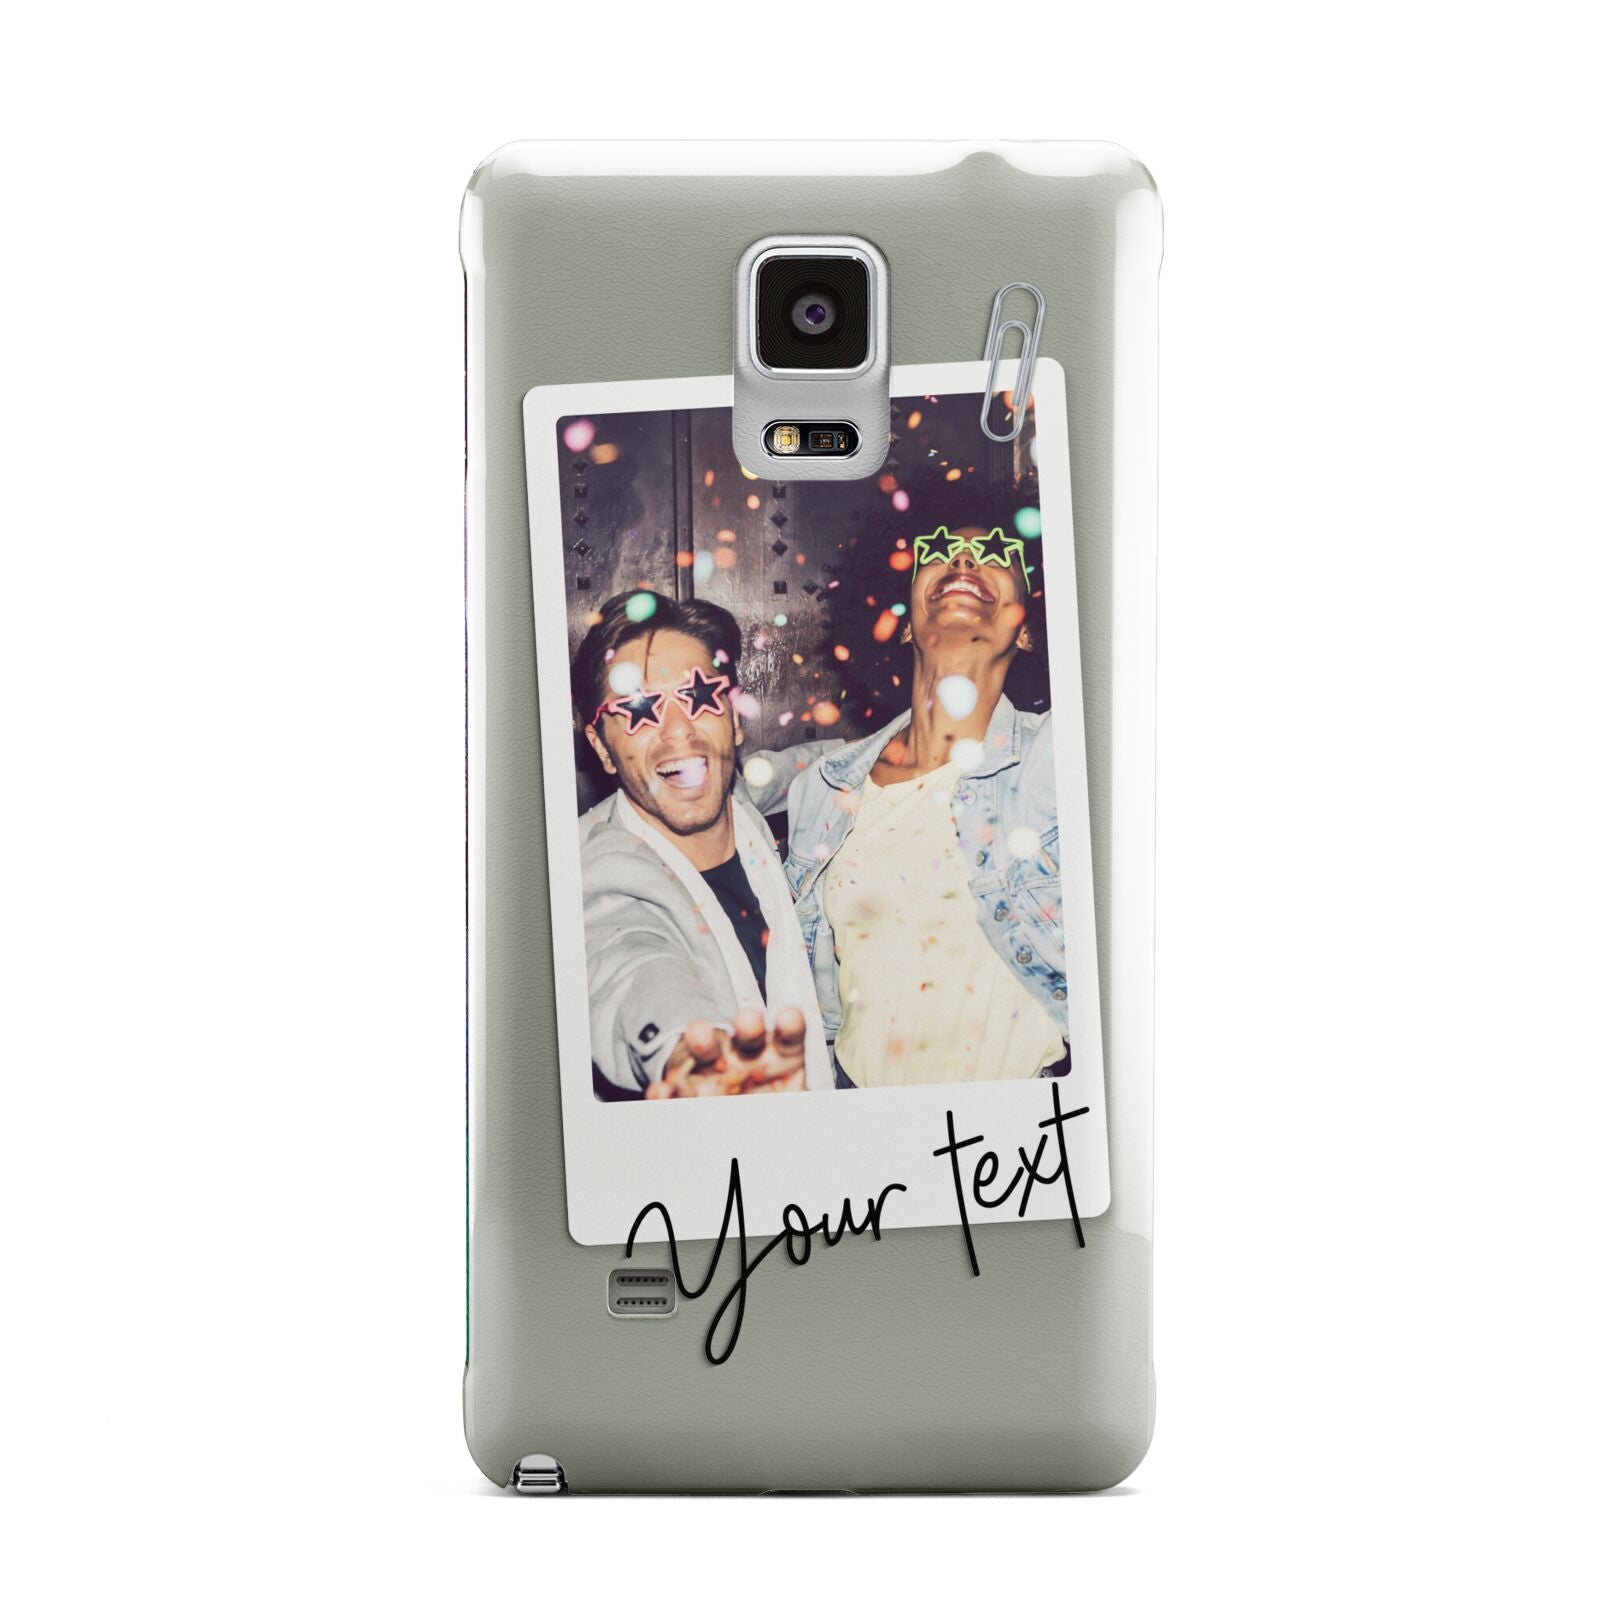 Personalised Photo with Text Samsung Galaxy Note 4 Case